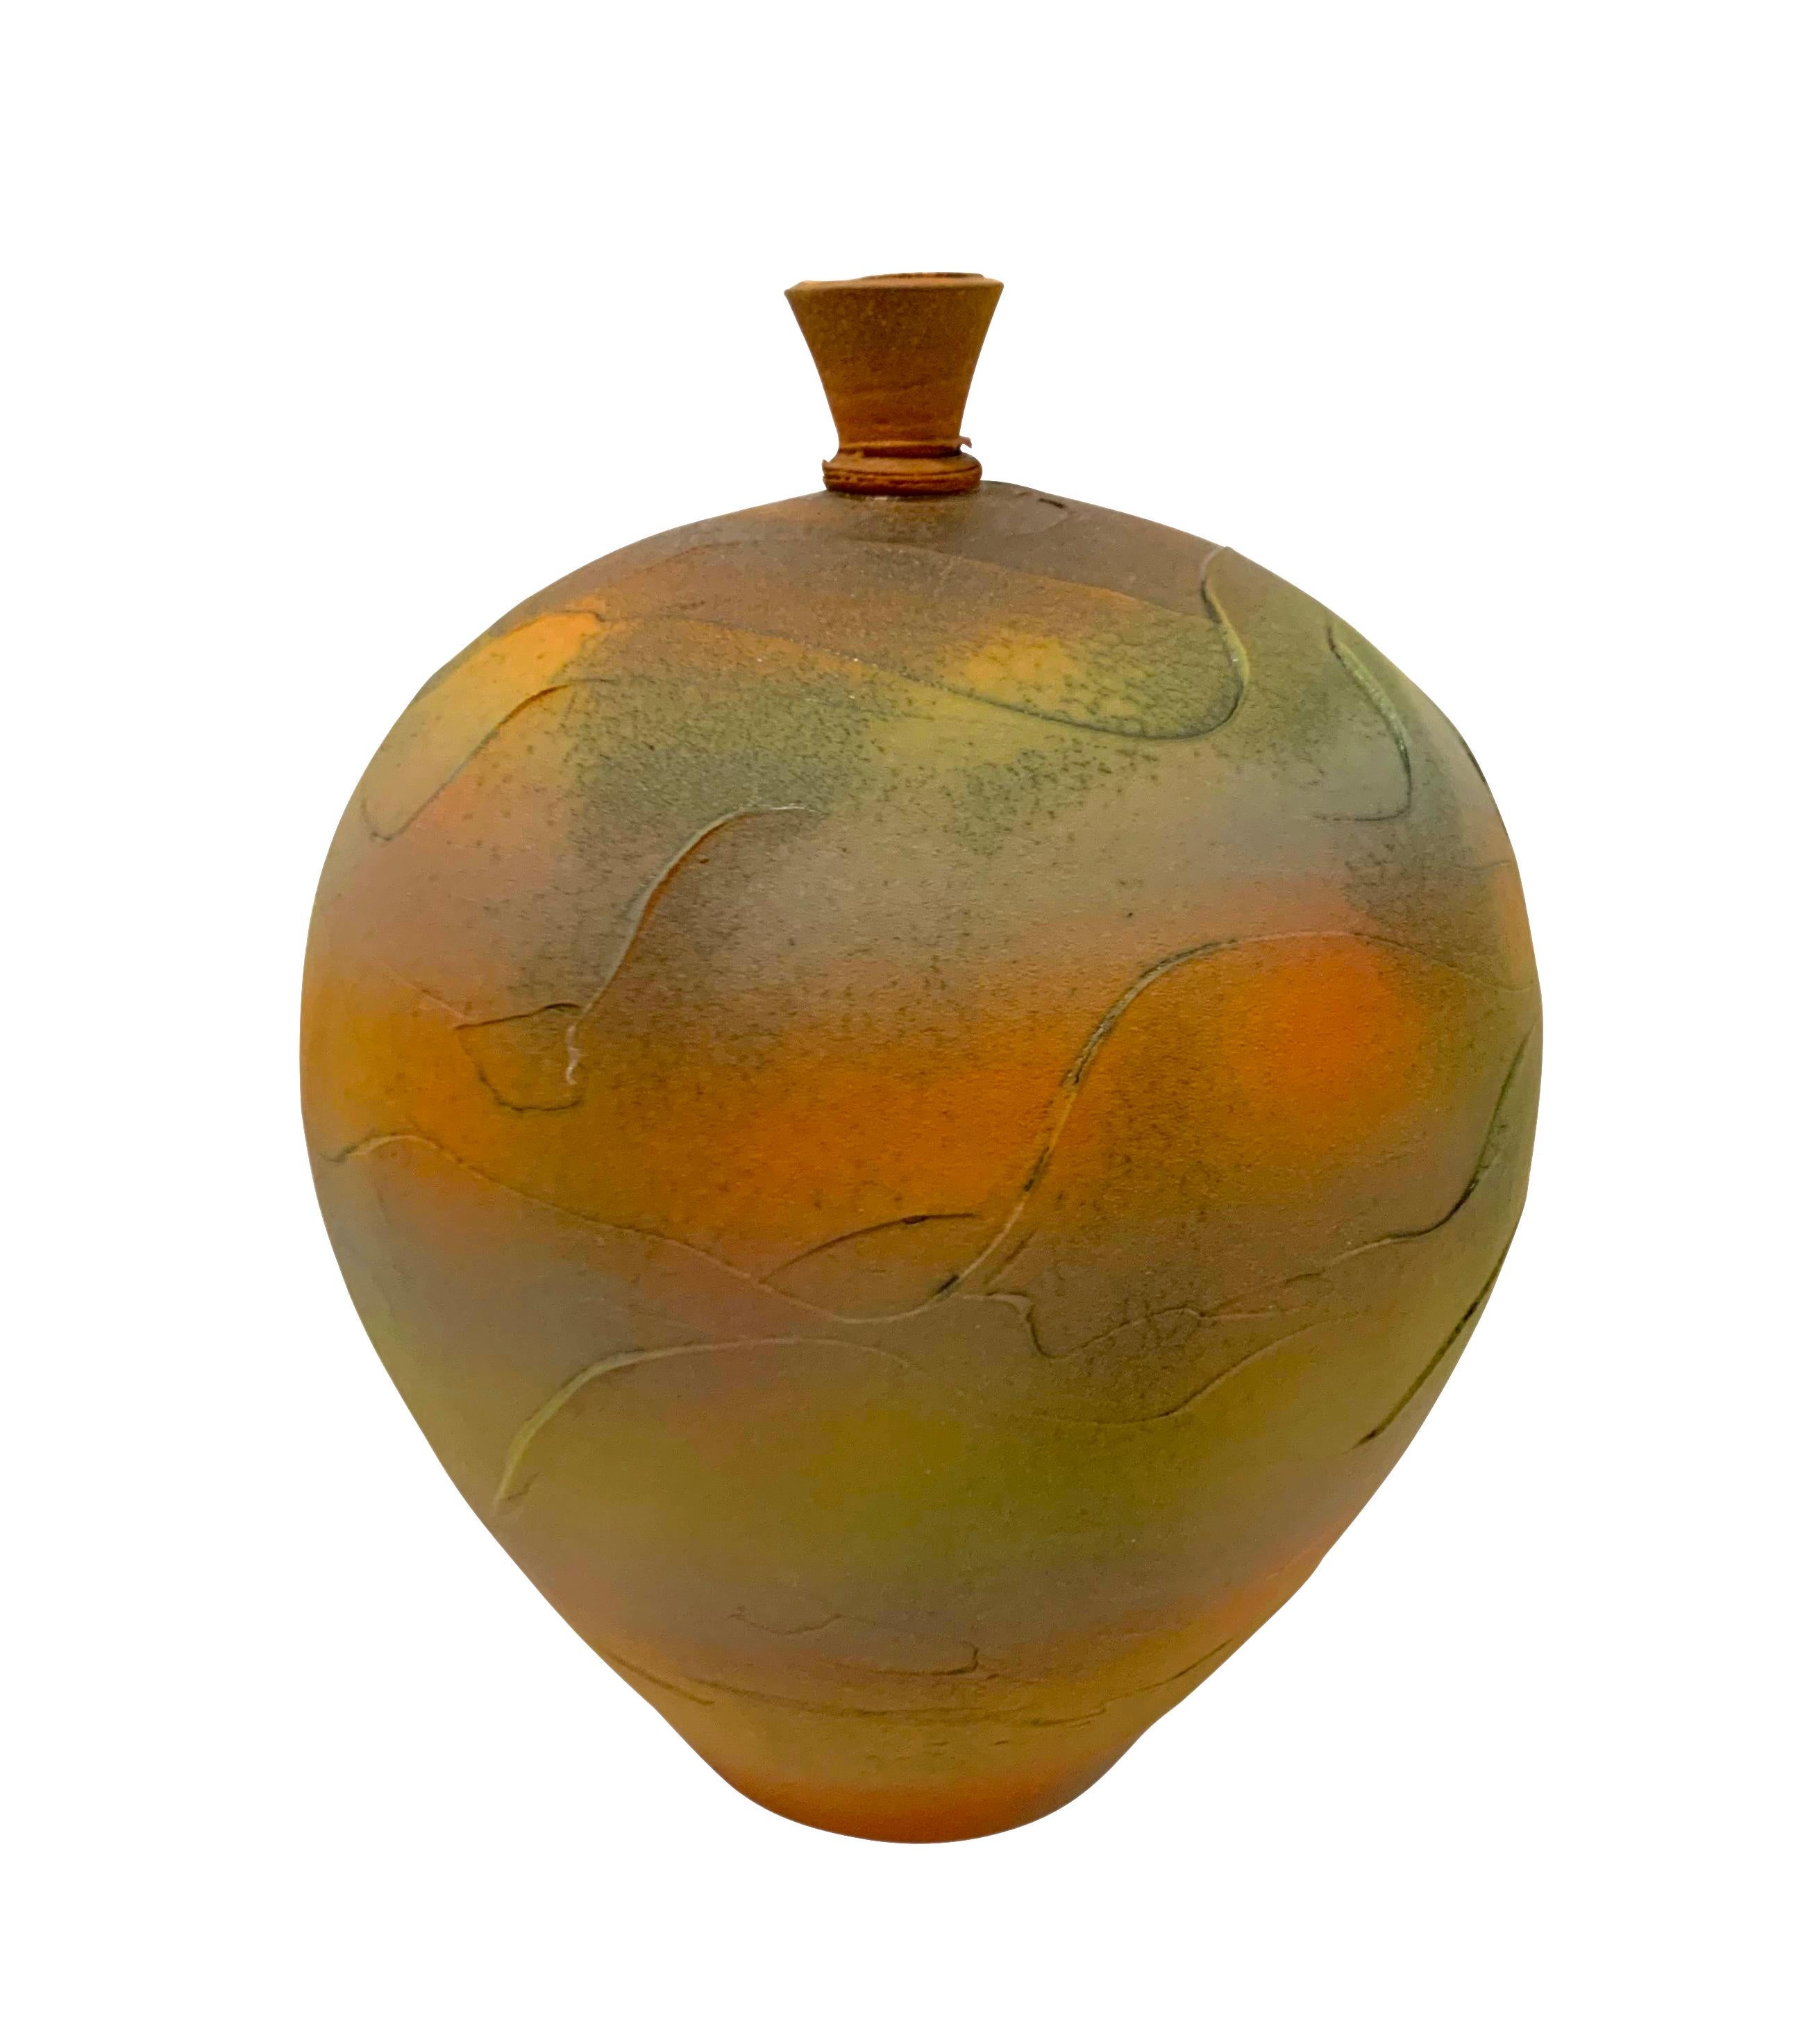 Hand made in the United States, a contemporary textured ceramic earthenware vase with small top.
Textured multi color orange, yellow and white matte glaze.
One of a kind.